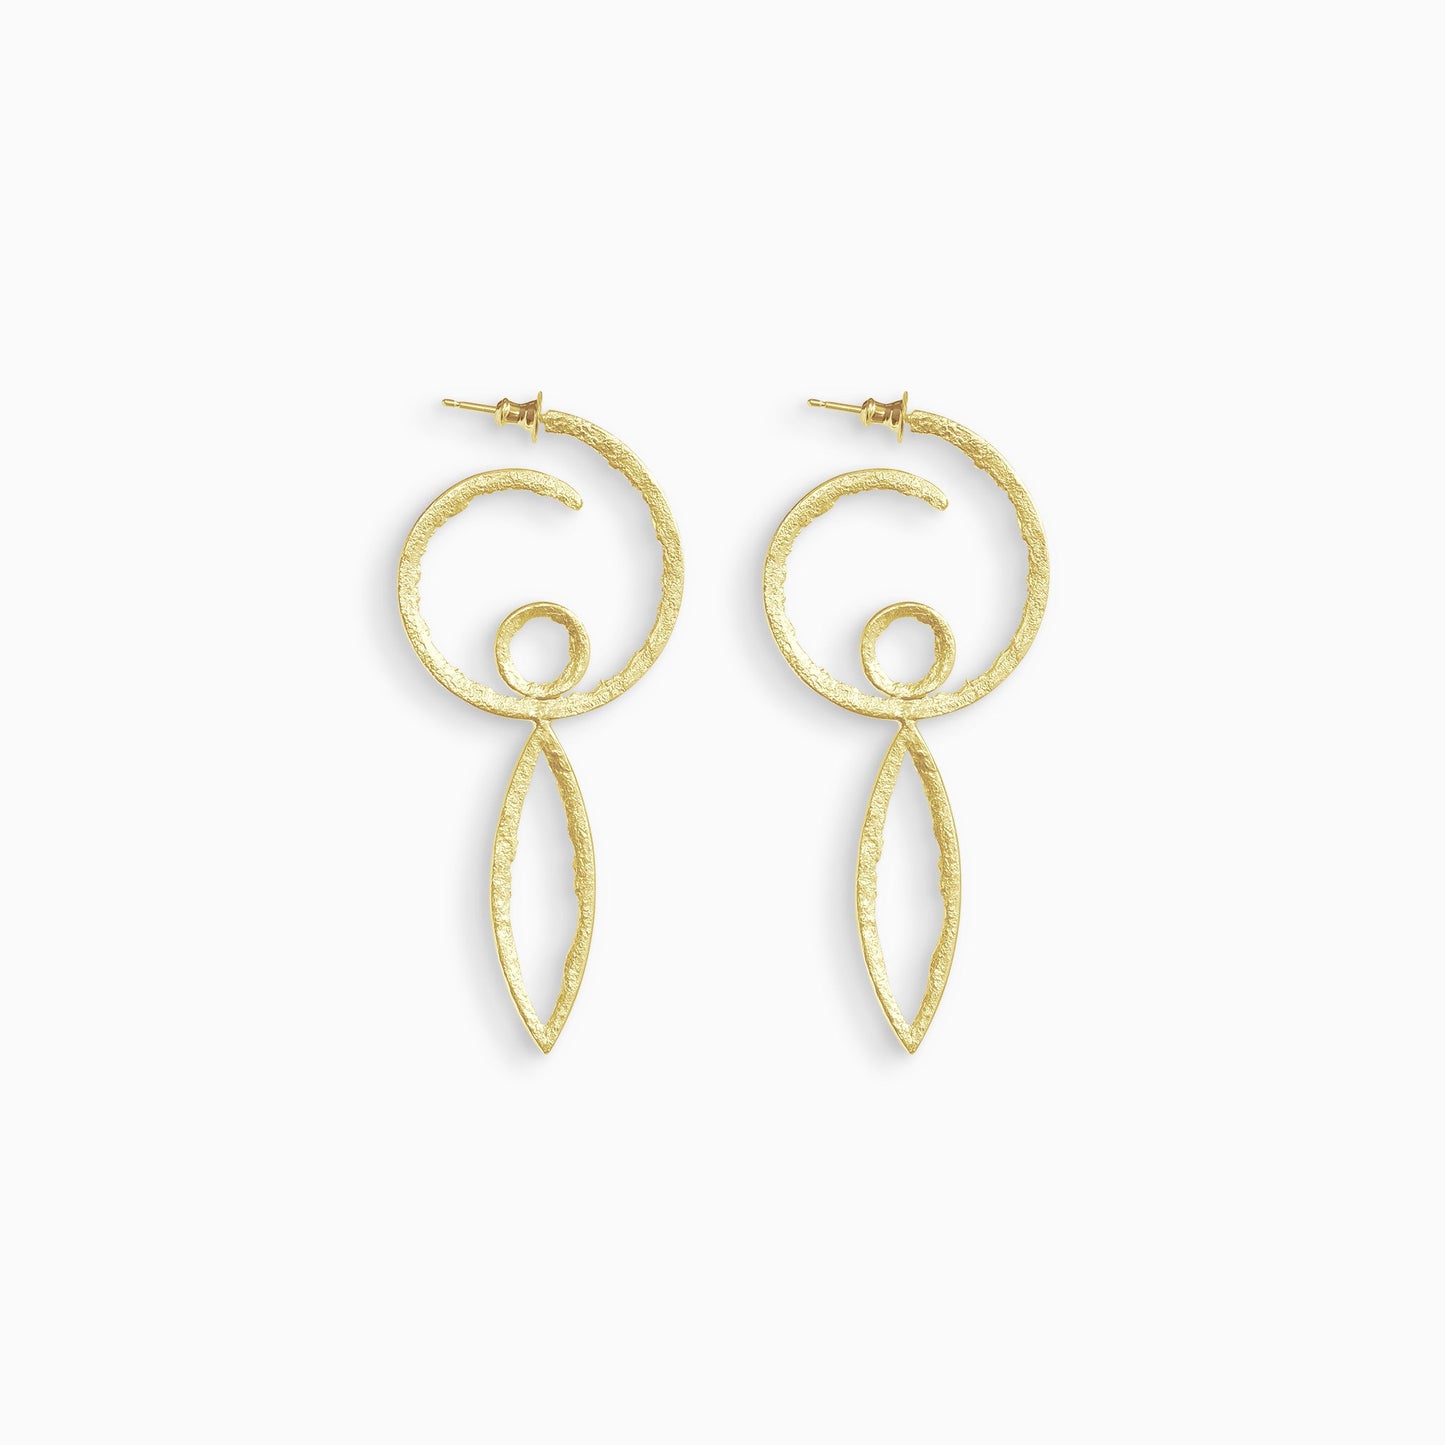 A pair of 18ct Fairtrade yellow gold hoop earrings in the form of a swirl with a stud ear fastening. Inside the bottom of the hoop is a small circle shape and below the hoop there is a long lozenge shape. These open shapes have a strong organic texture and are smooth on the outside edge with fragmented inside edges. 36mm outside diameter.